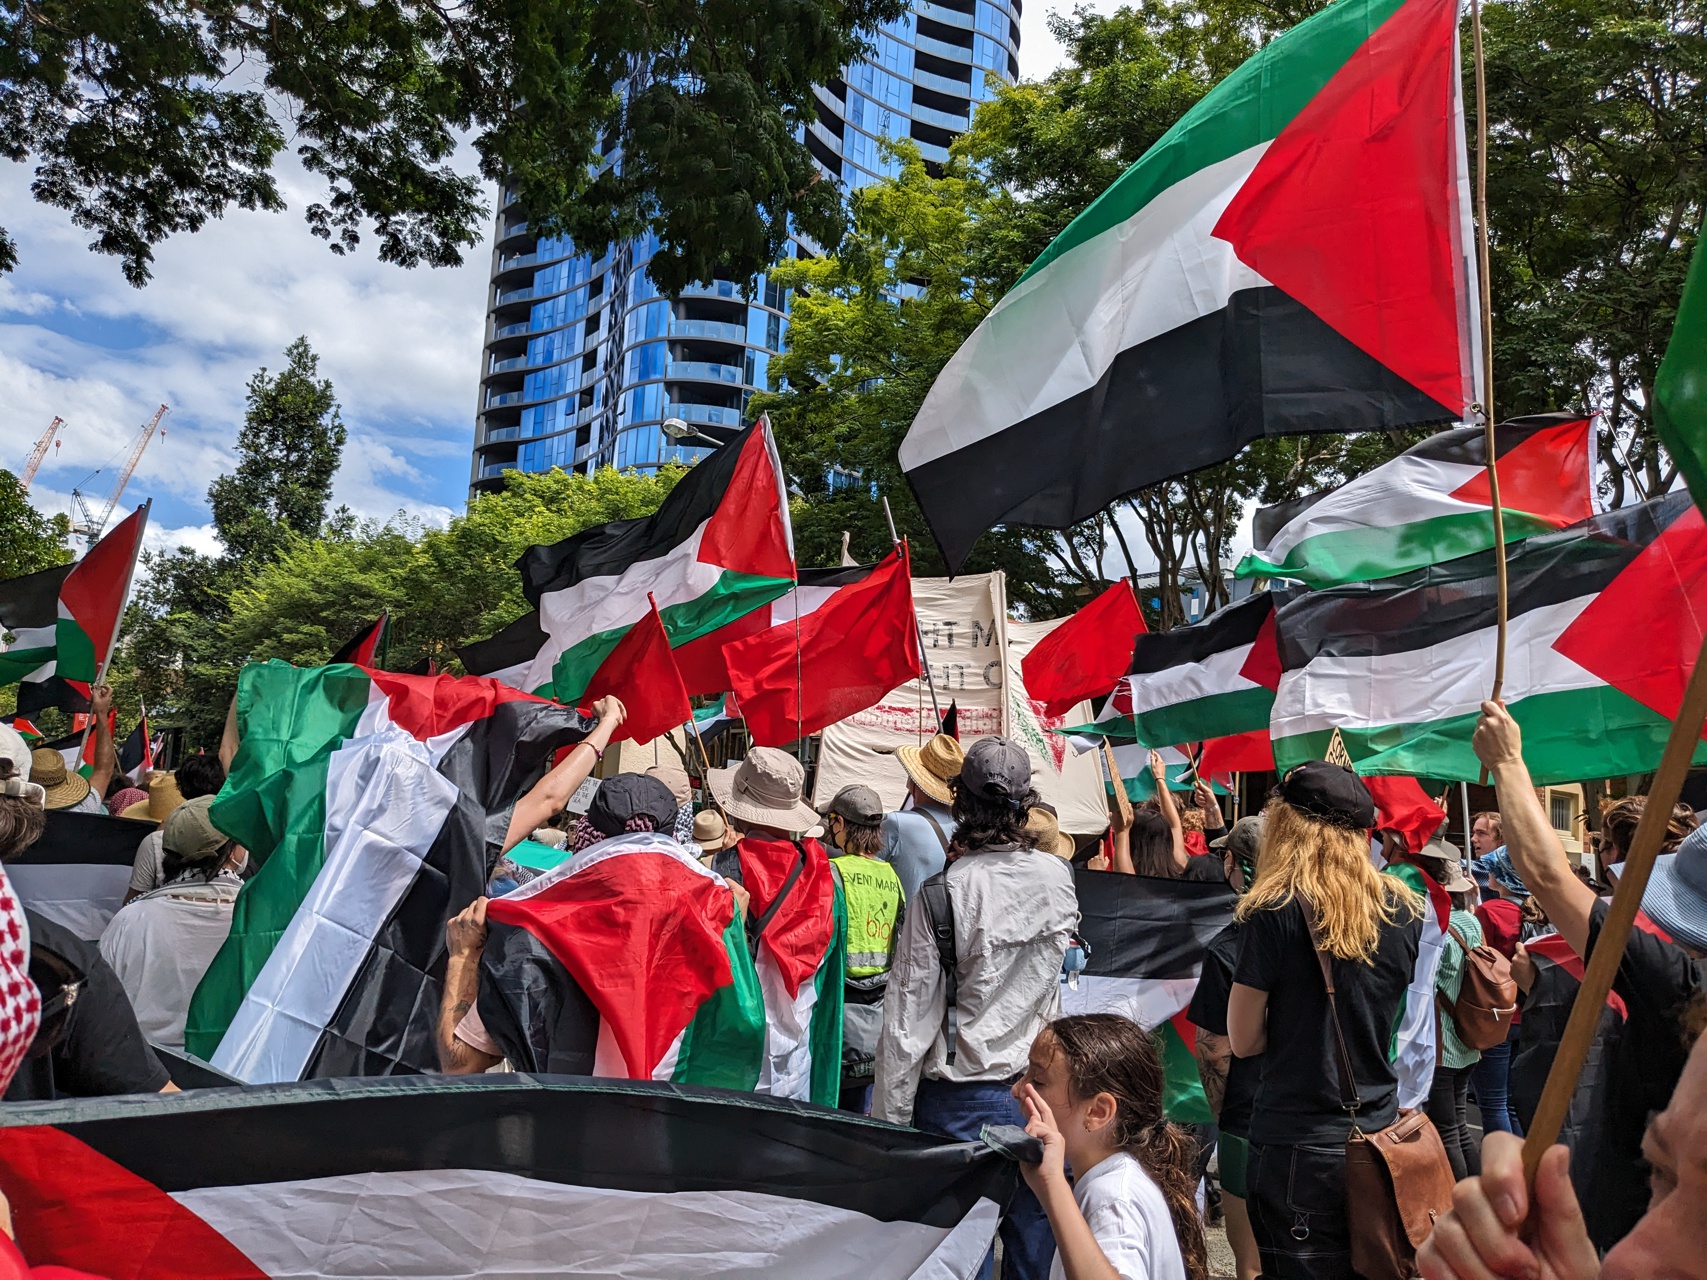 Carrying Palestinian flags